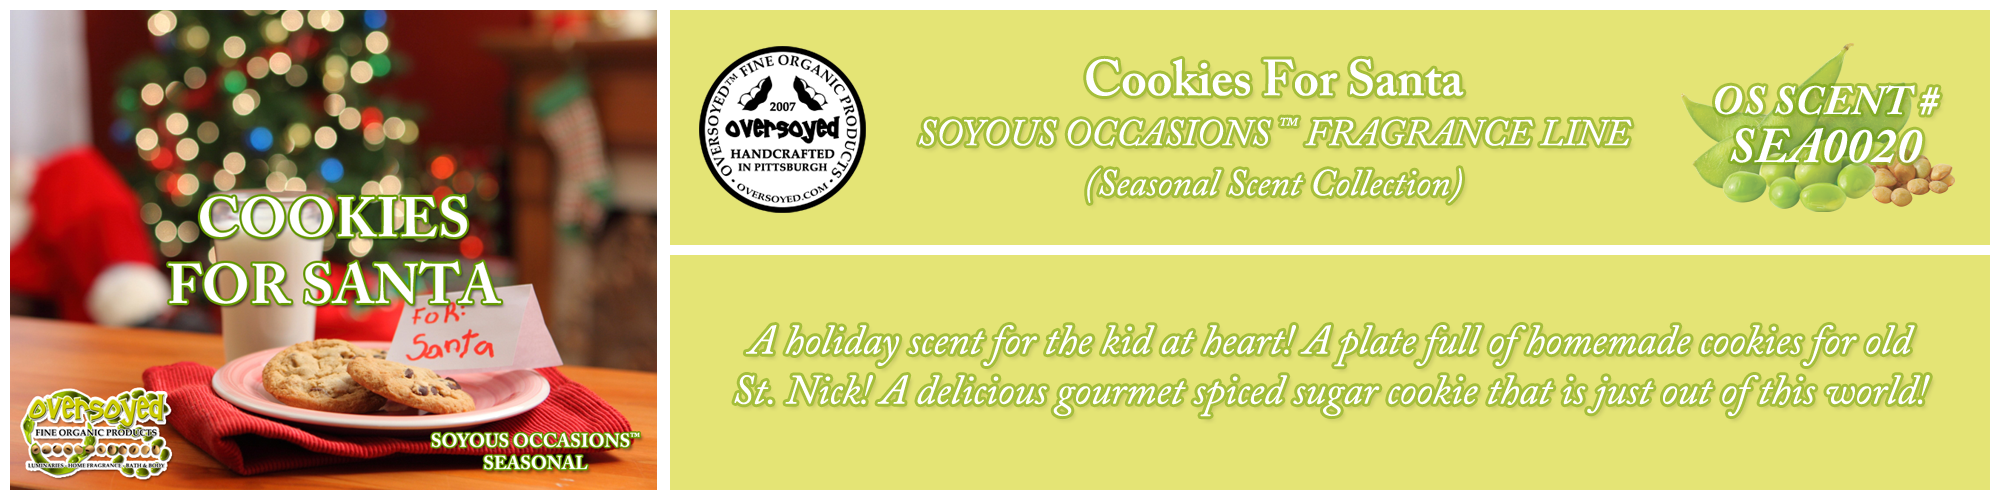 Cookies For Santa Handcrafted Products Collection